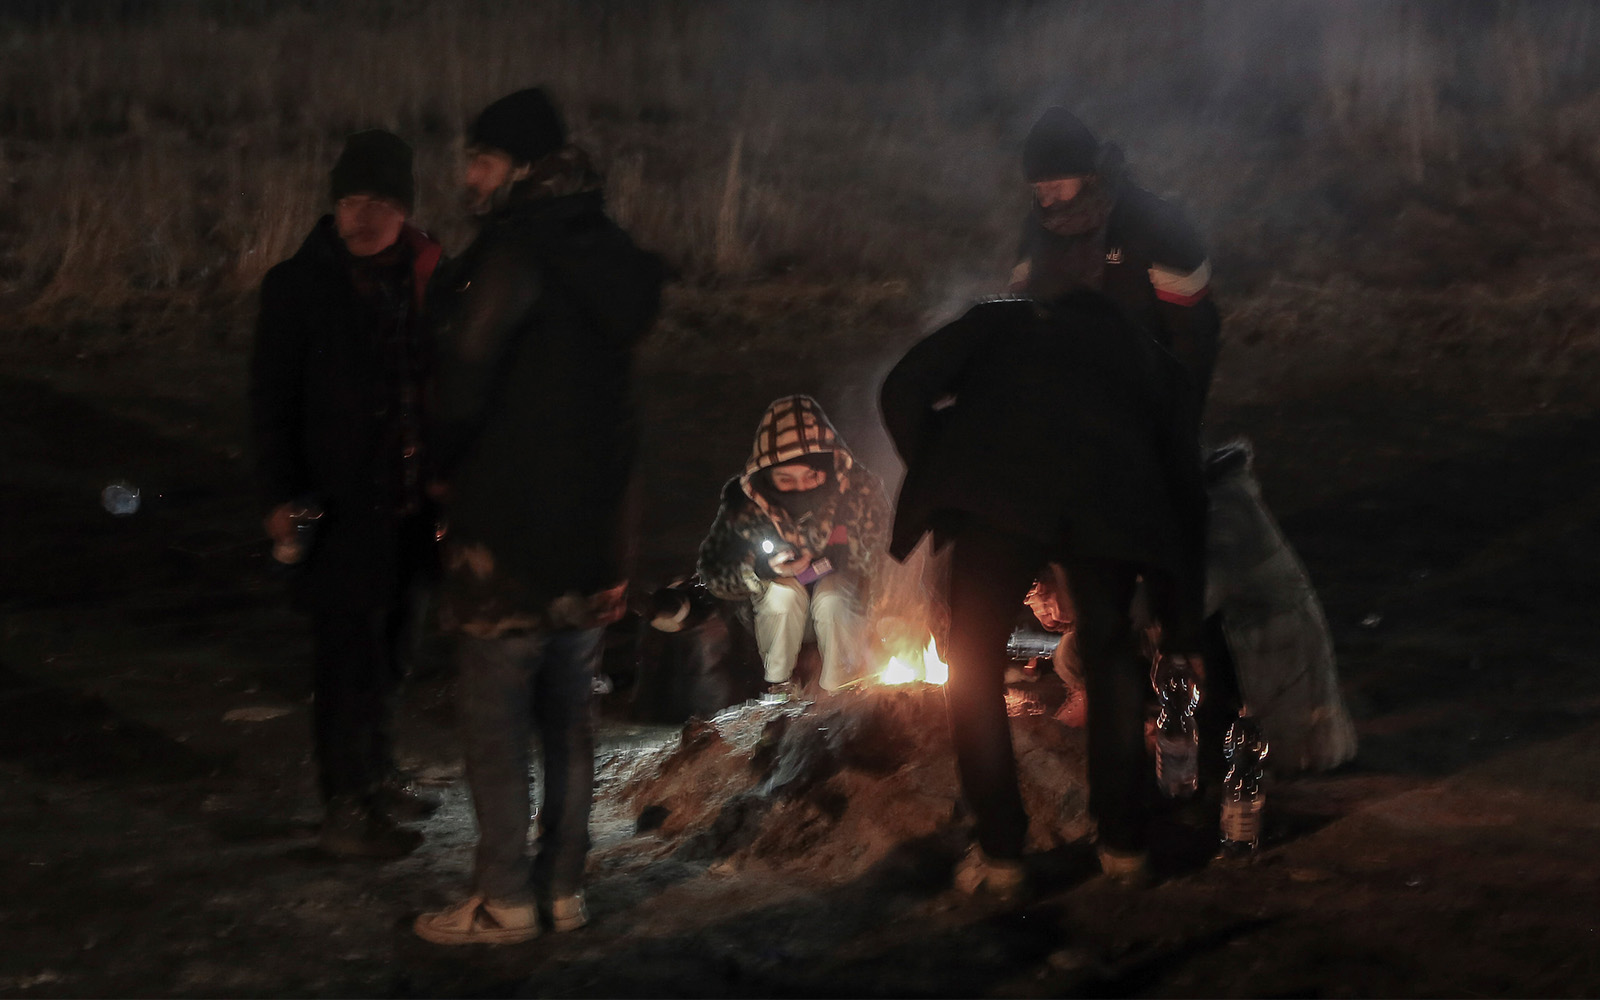 Students gather around campfire to warm themself at the Medyka border crossing after fleeing from the Ukraine, in Poland, February 28, 2022. (AP Photo/Visar Kryeziu)